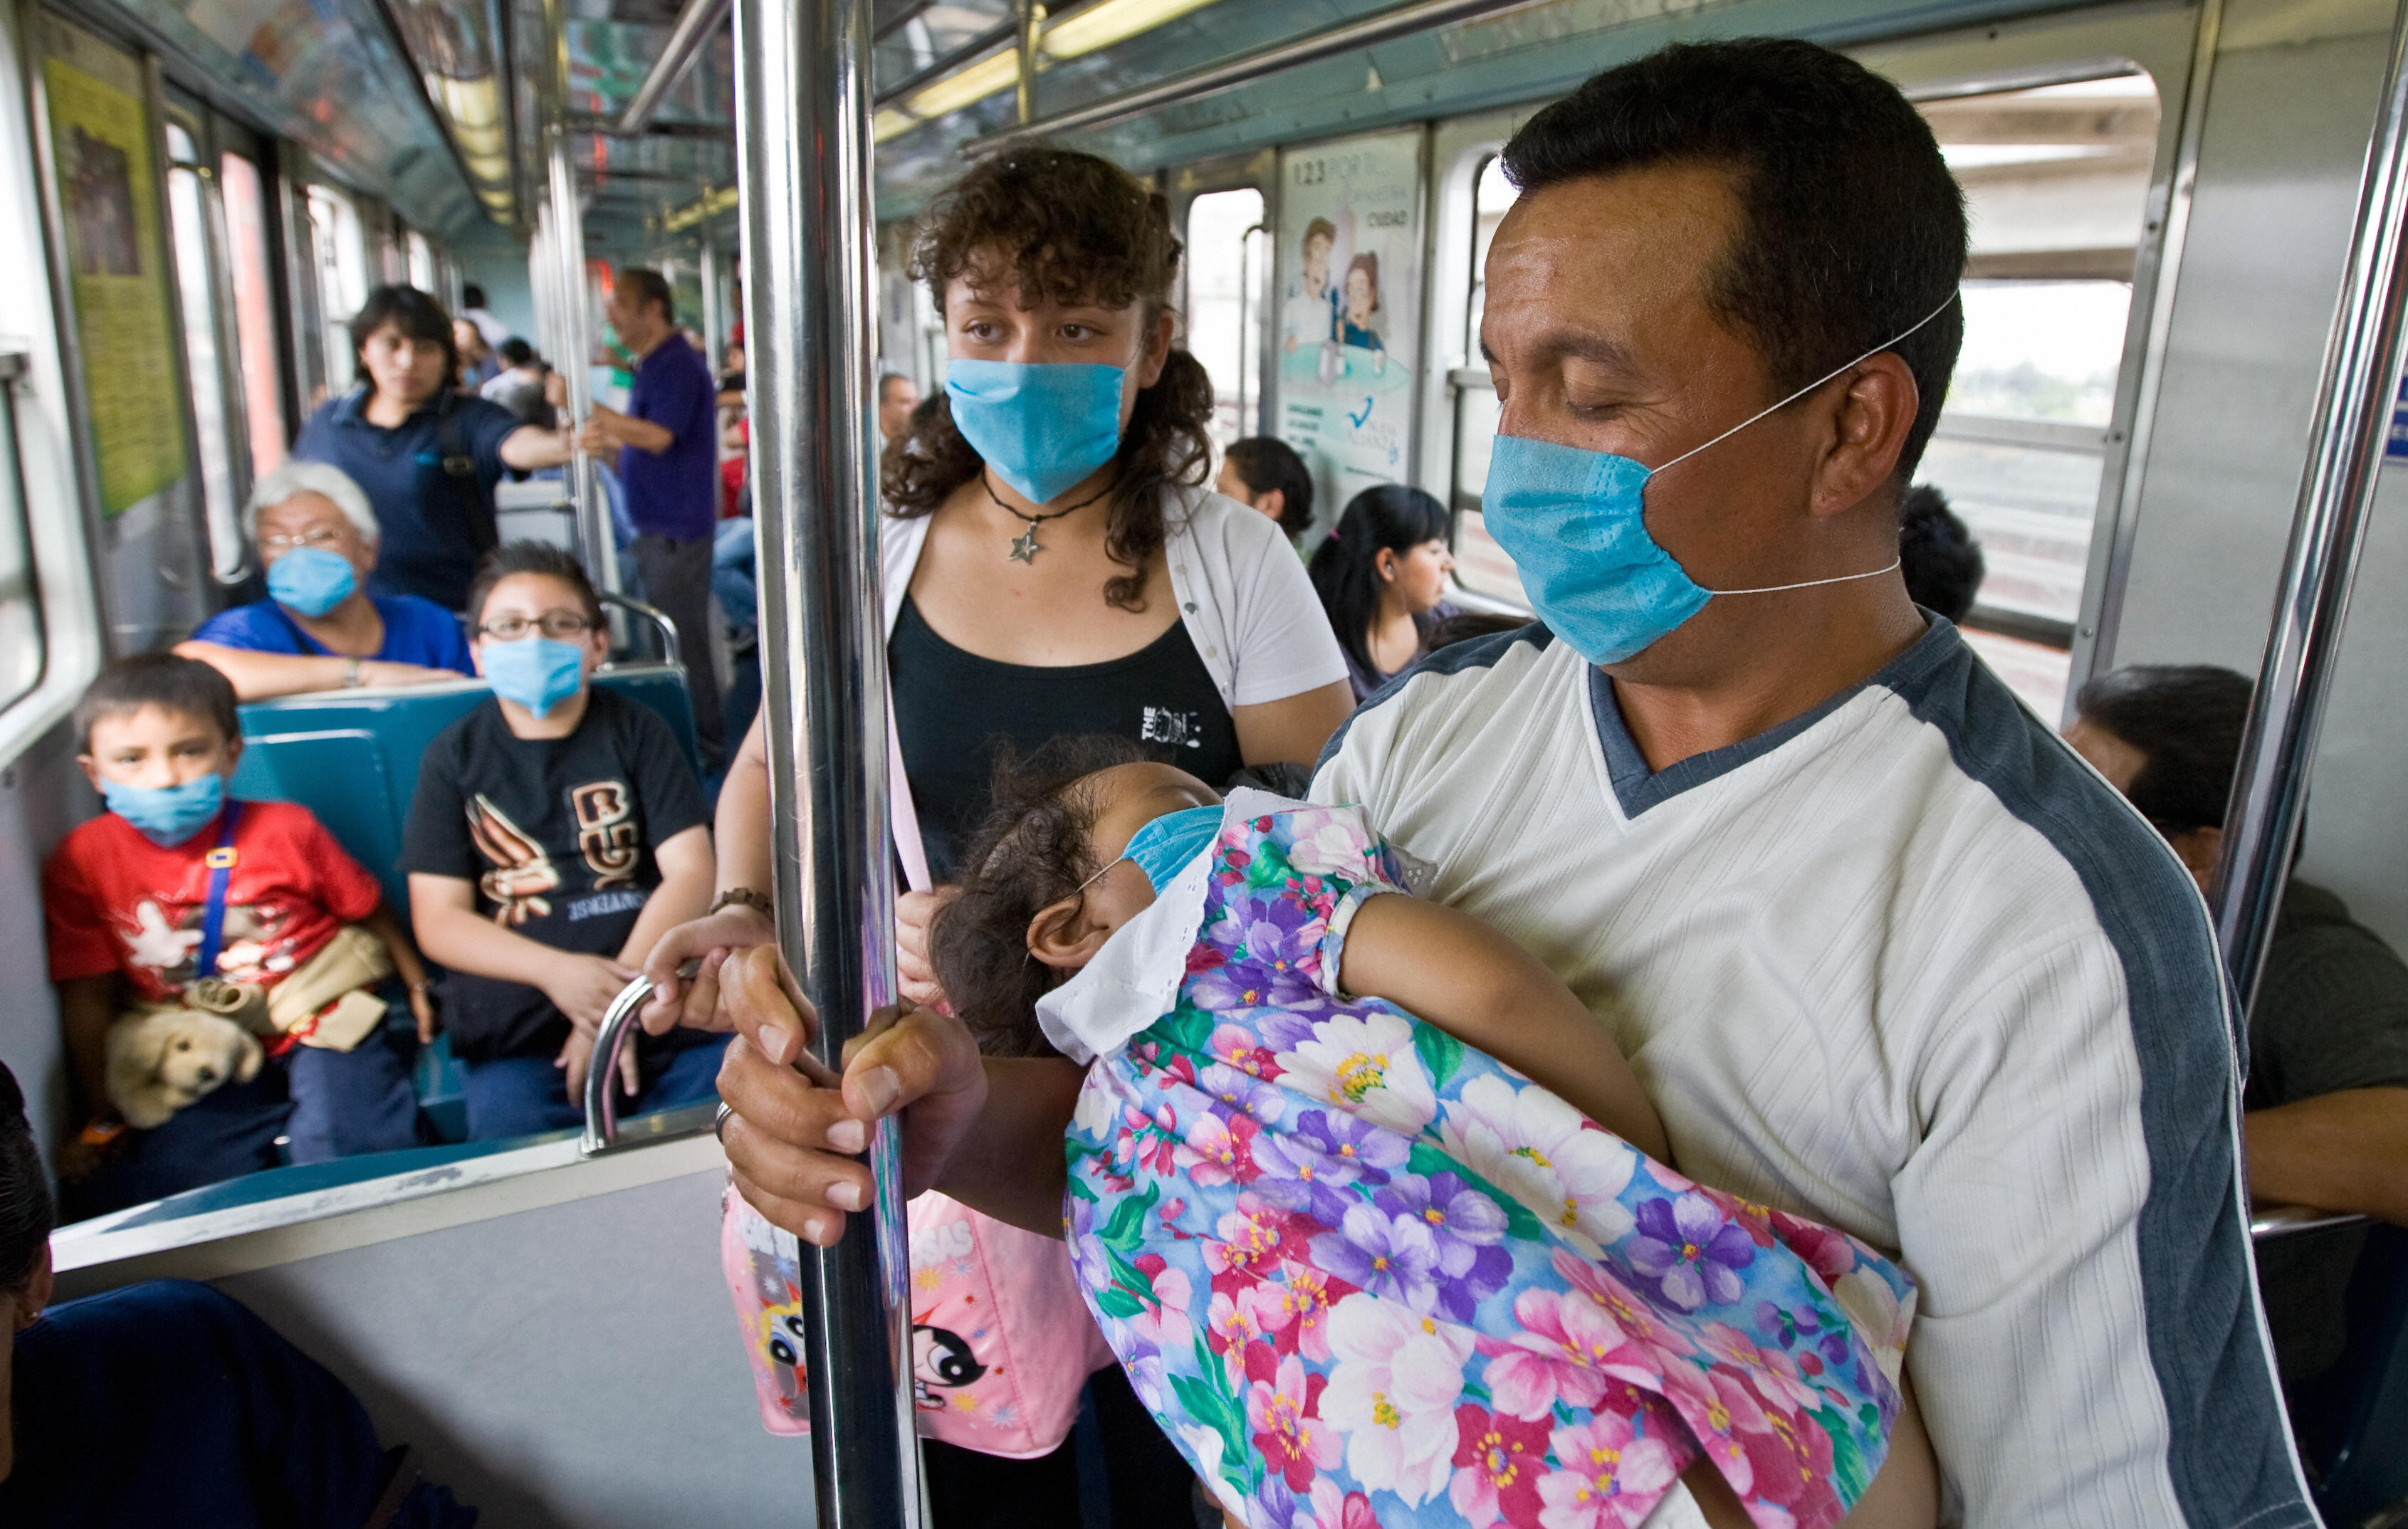 Commuters wear face masks to prevent the infection by the swine flu virus in while travelling aboard Mexico City's subway. (Ronaldo Schemidt/AFP via Getty Images)